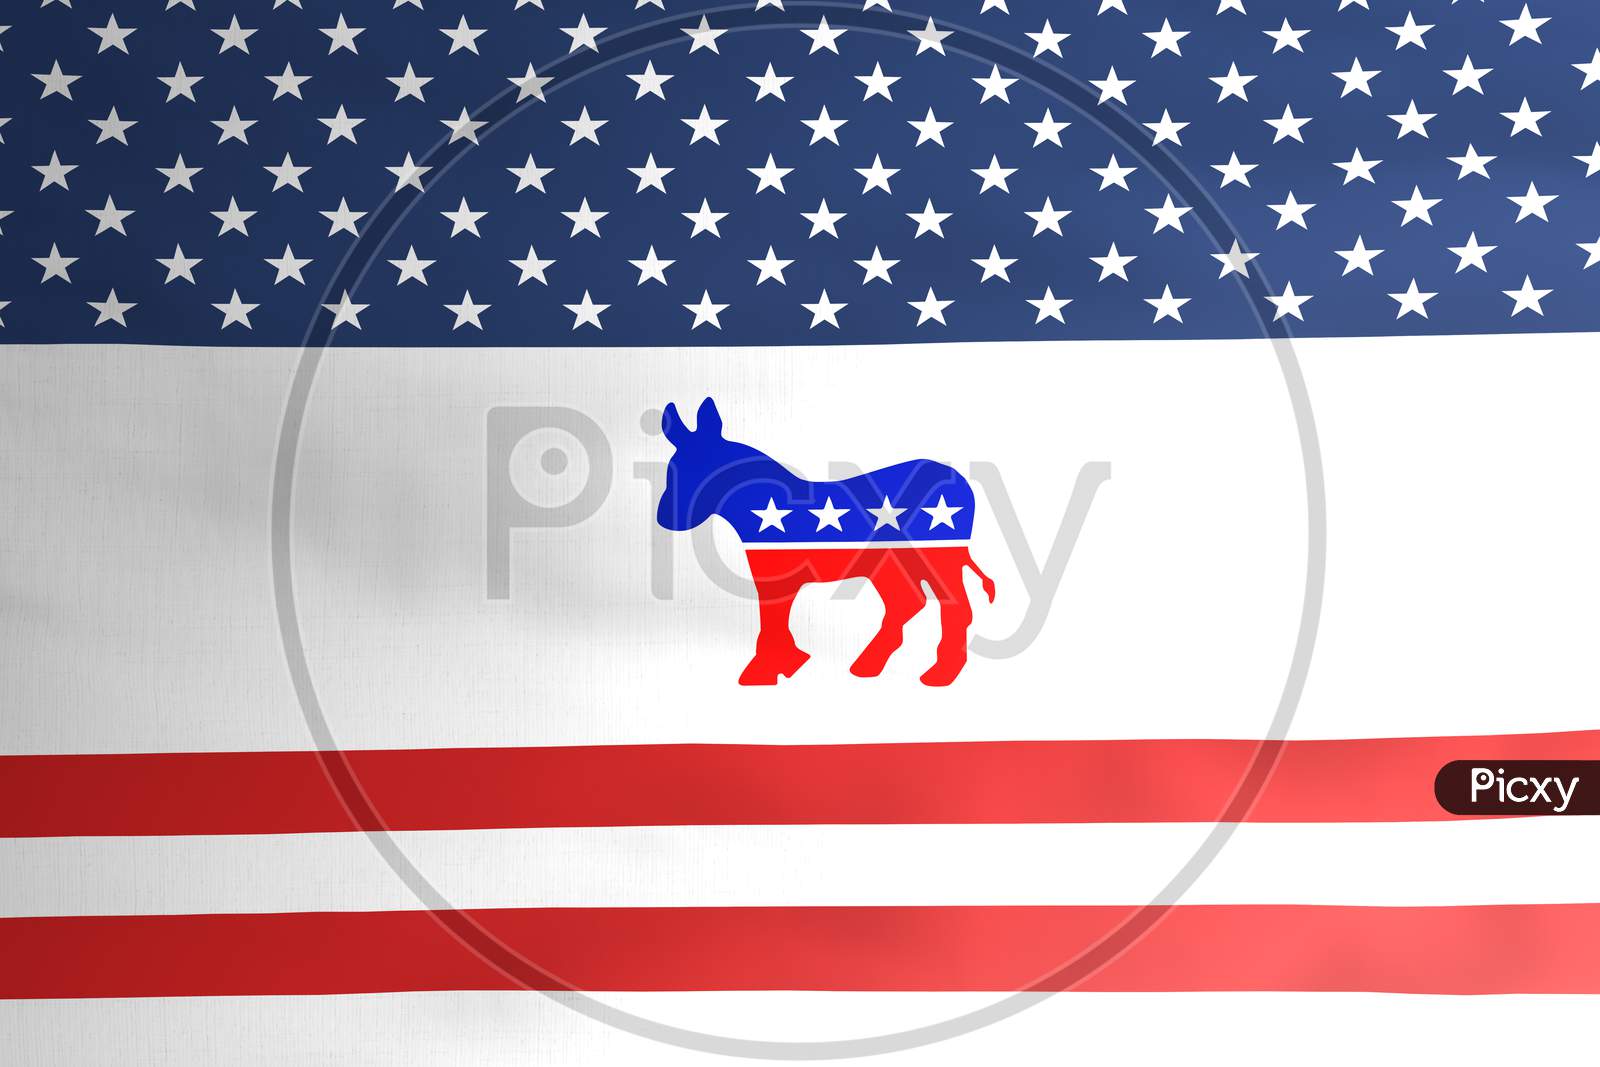 Democratic Party Donkey Emblem Icon On American Flag Illustration Design, Usa Presidential Election 2020 Concept, Editorial.